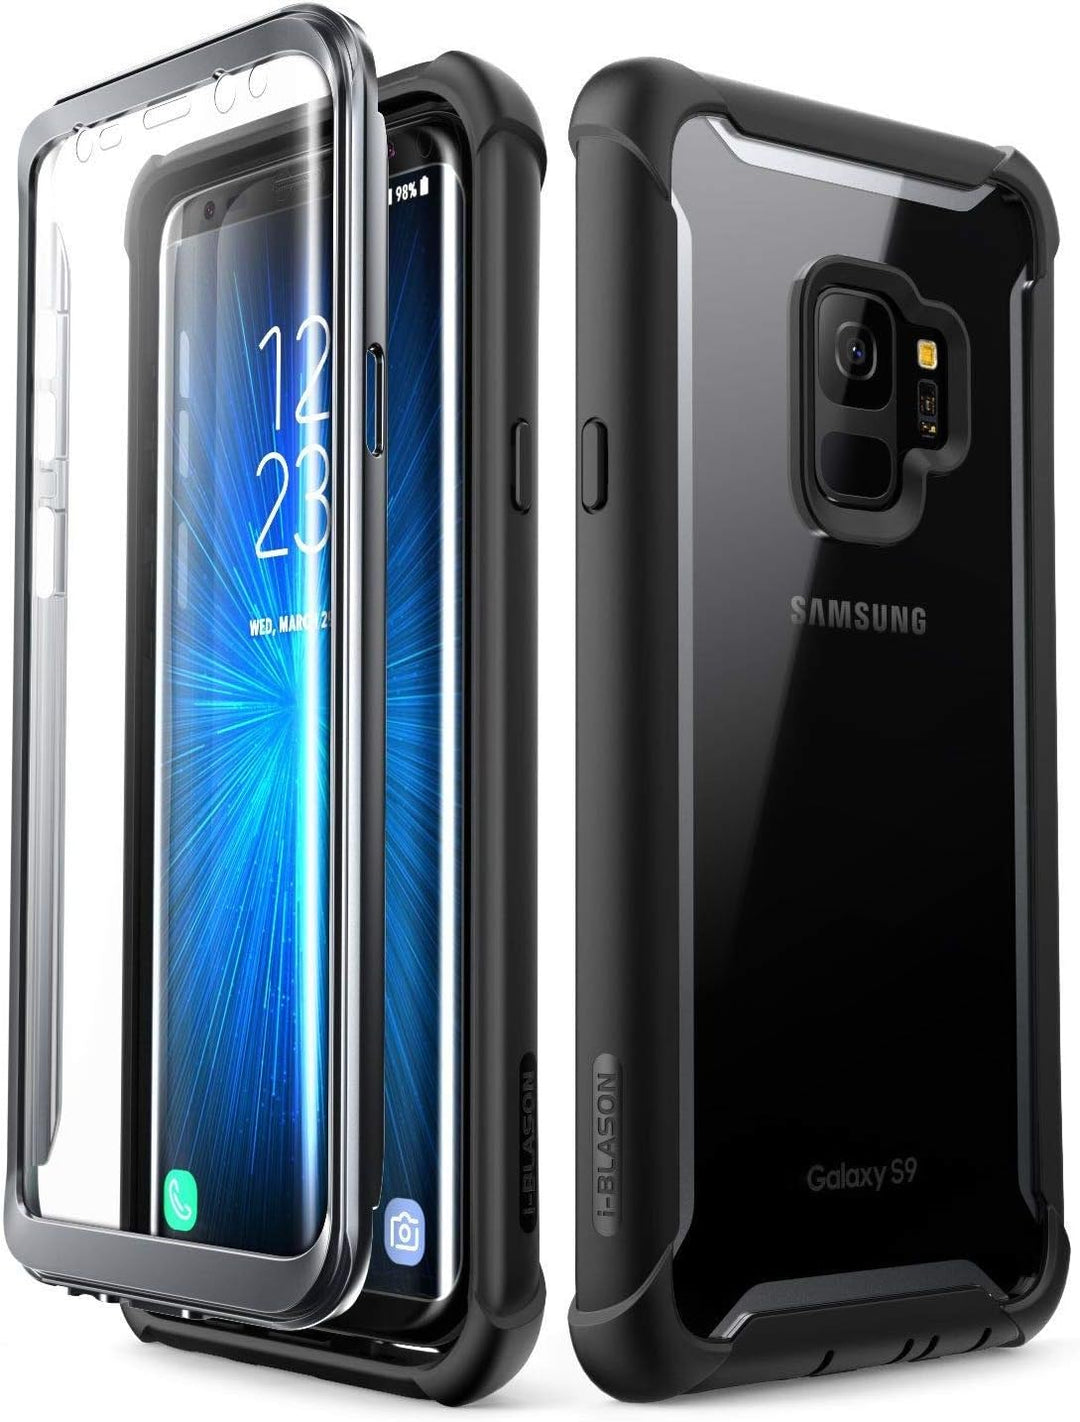 i-Blason Case for Galaxy S9 2018 Release, Ares Full-body Rugged Clear Bumper Case with Built-in Screen Protector (Black)